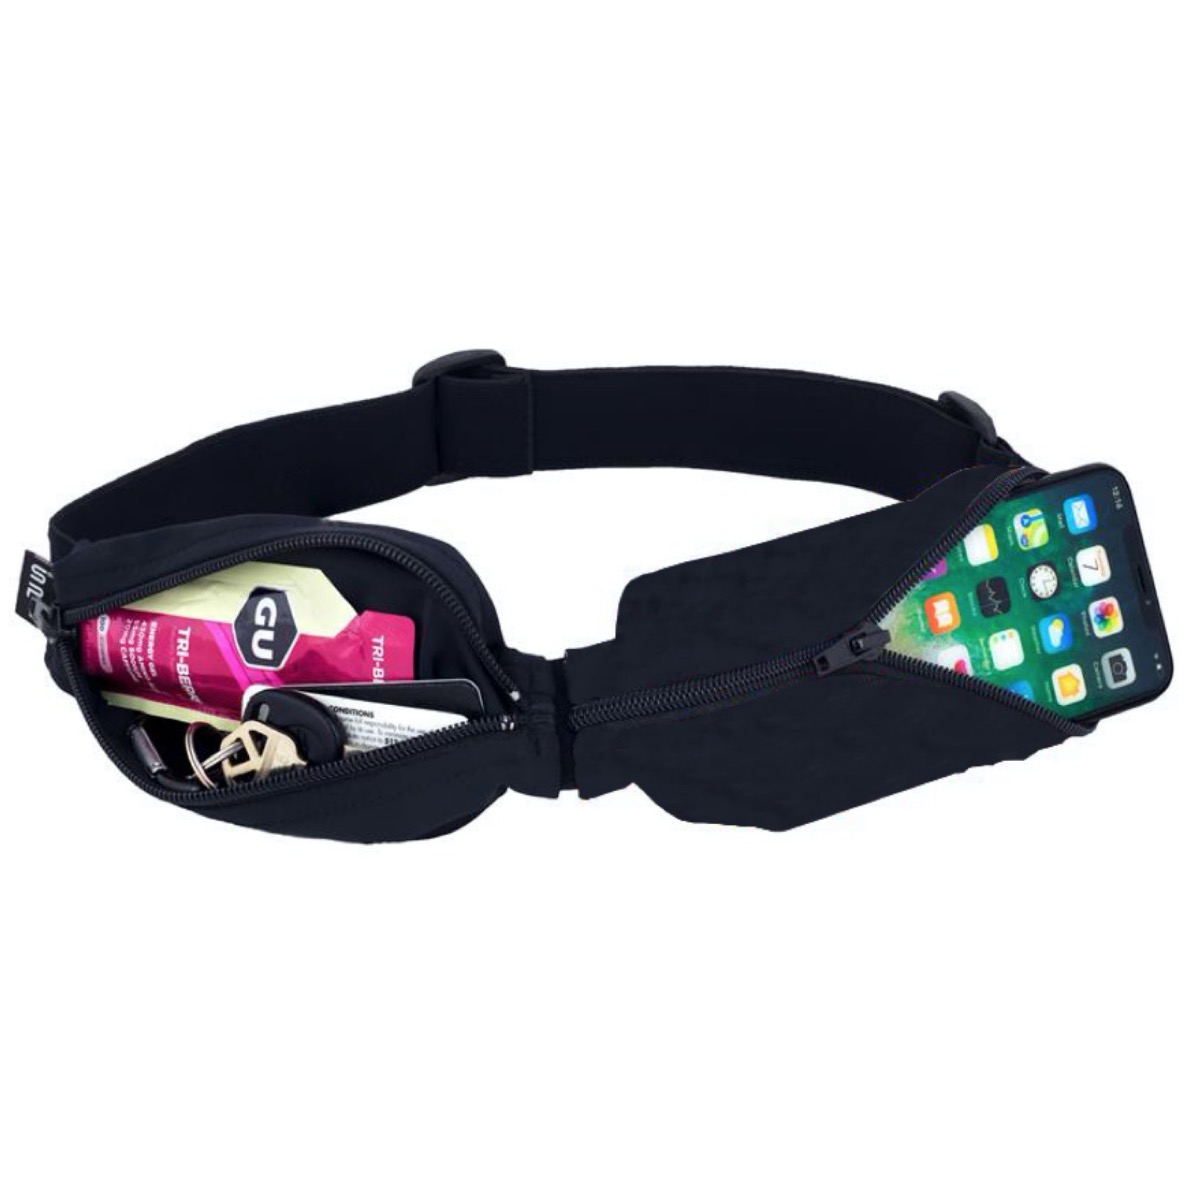 jogging belt with phone